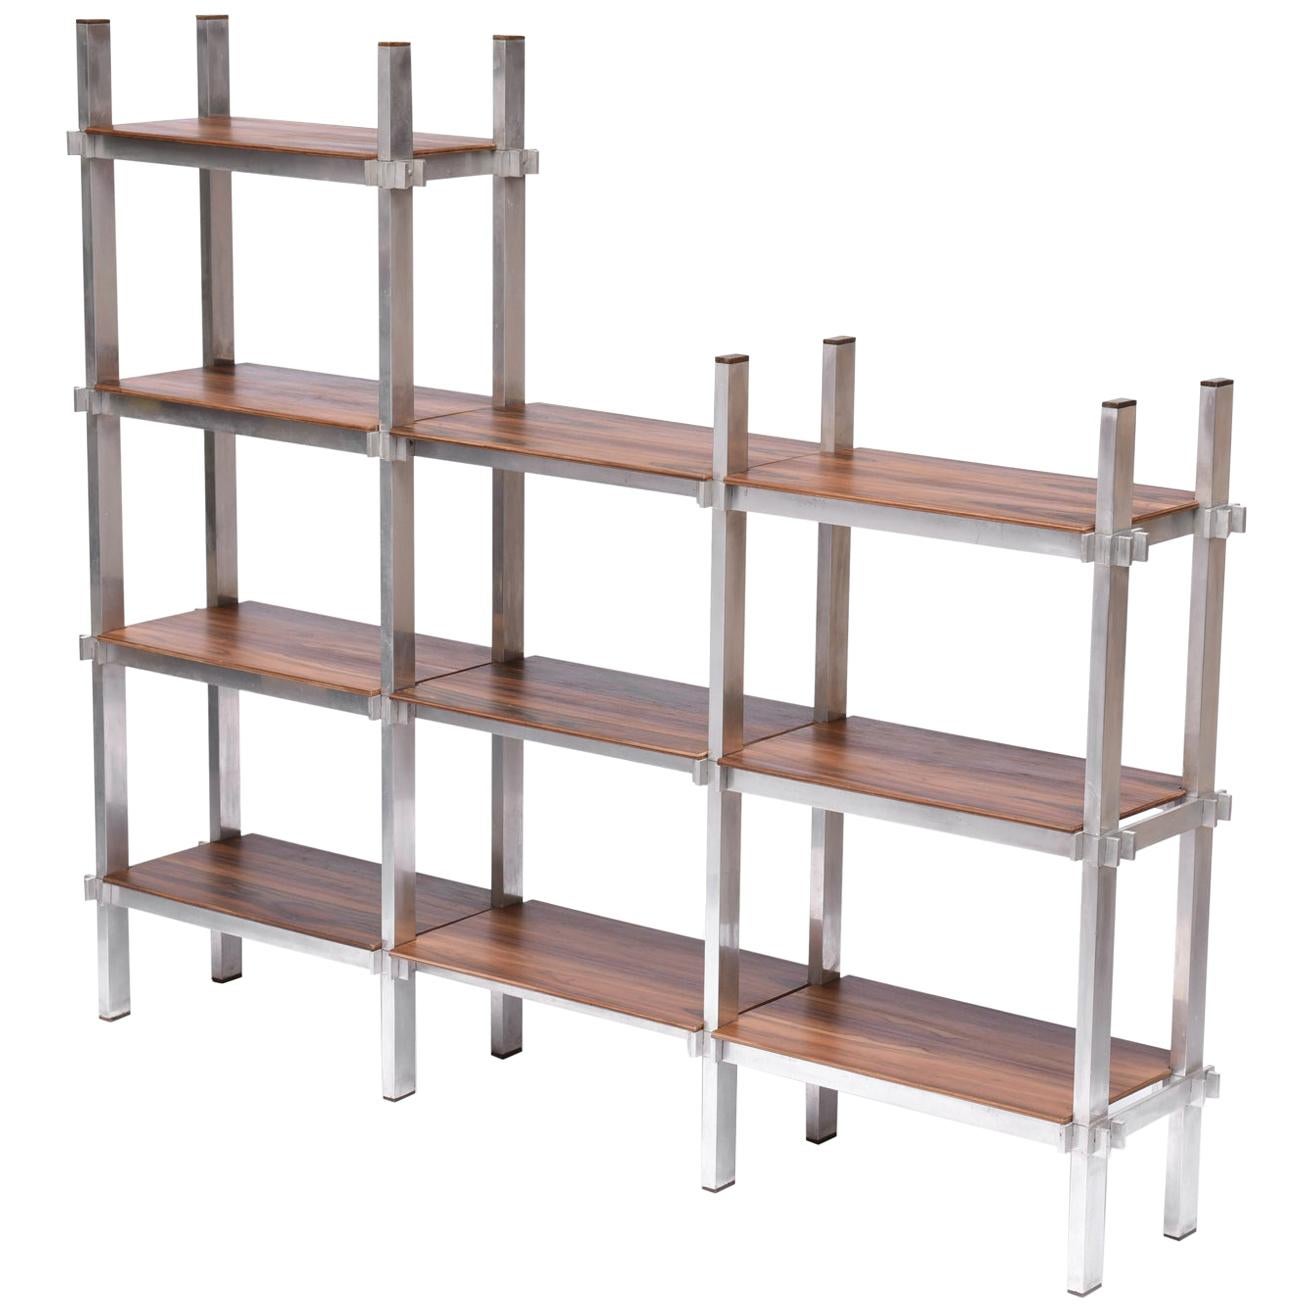 Midcentury Brazilian Bookcase with Structure in Aluminum and Plywood, 1960s